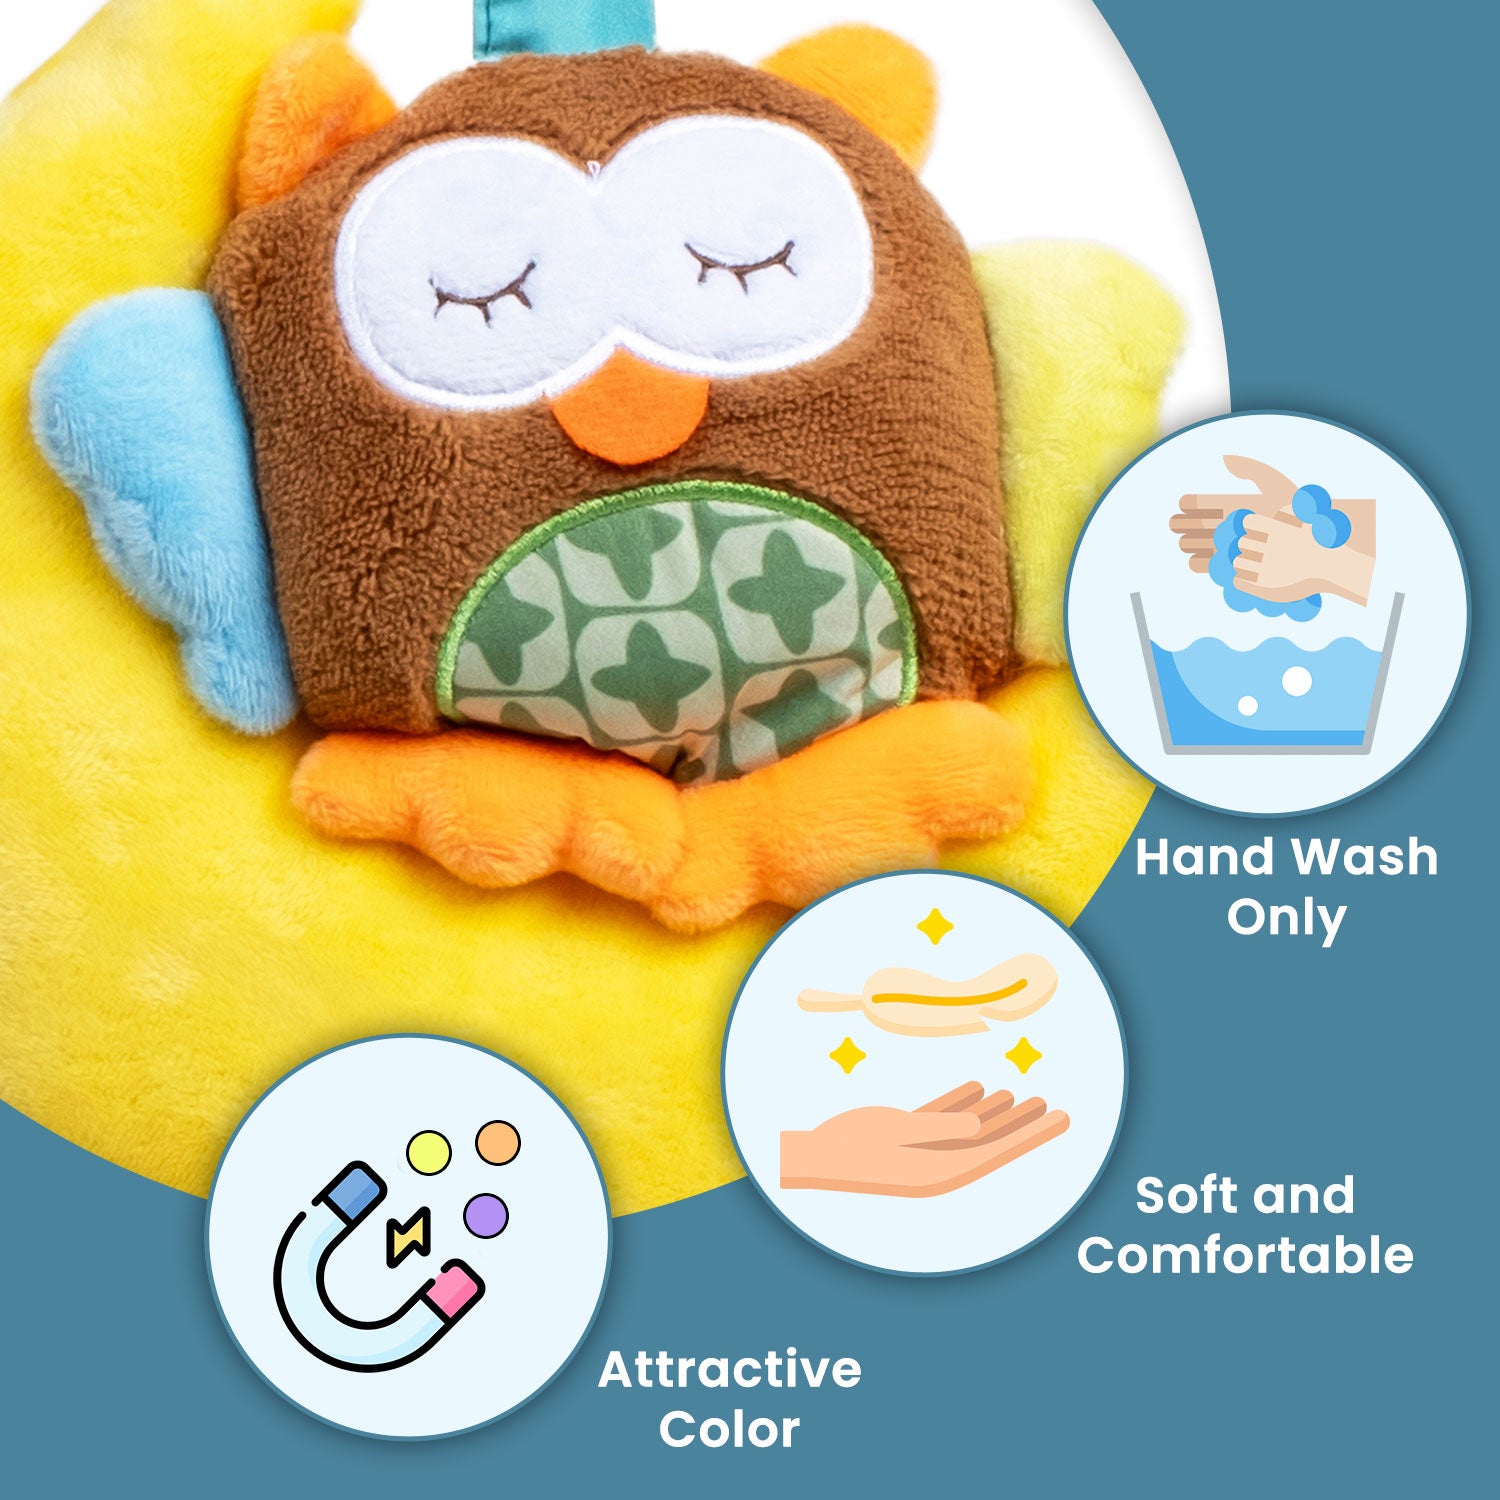 Baby Moo Sweet Dreams Owl Hanging Musical Pulling Toy - Yellow